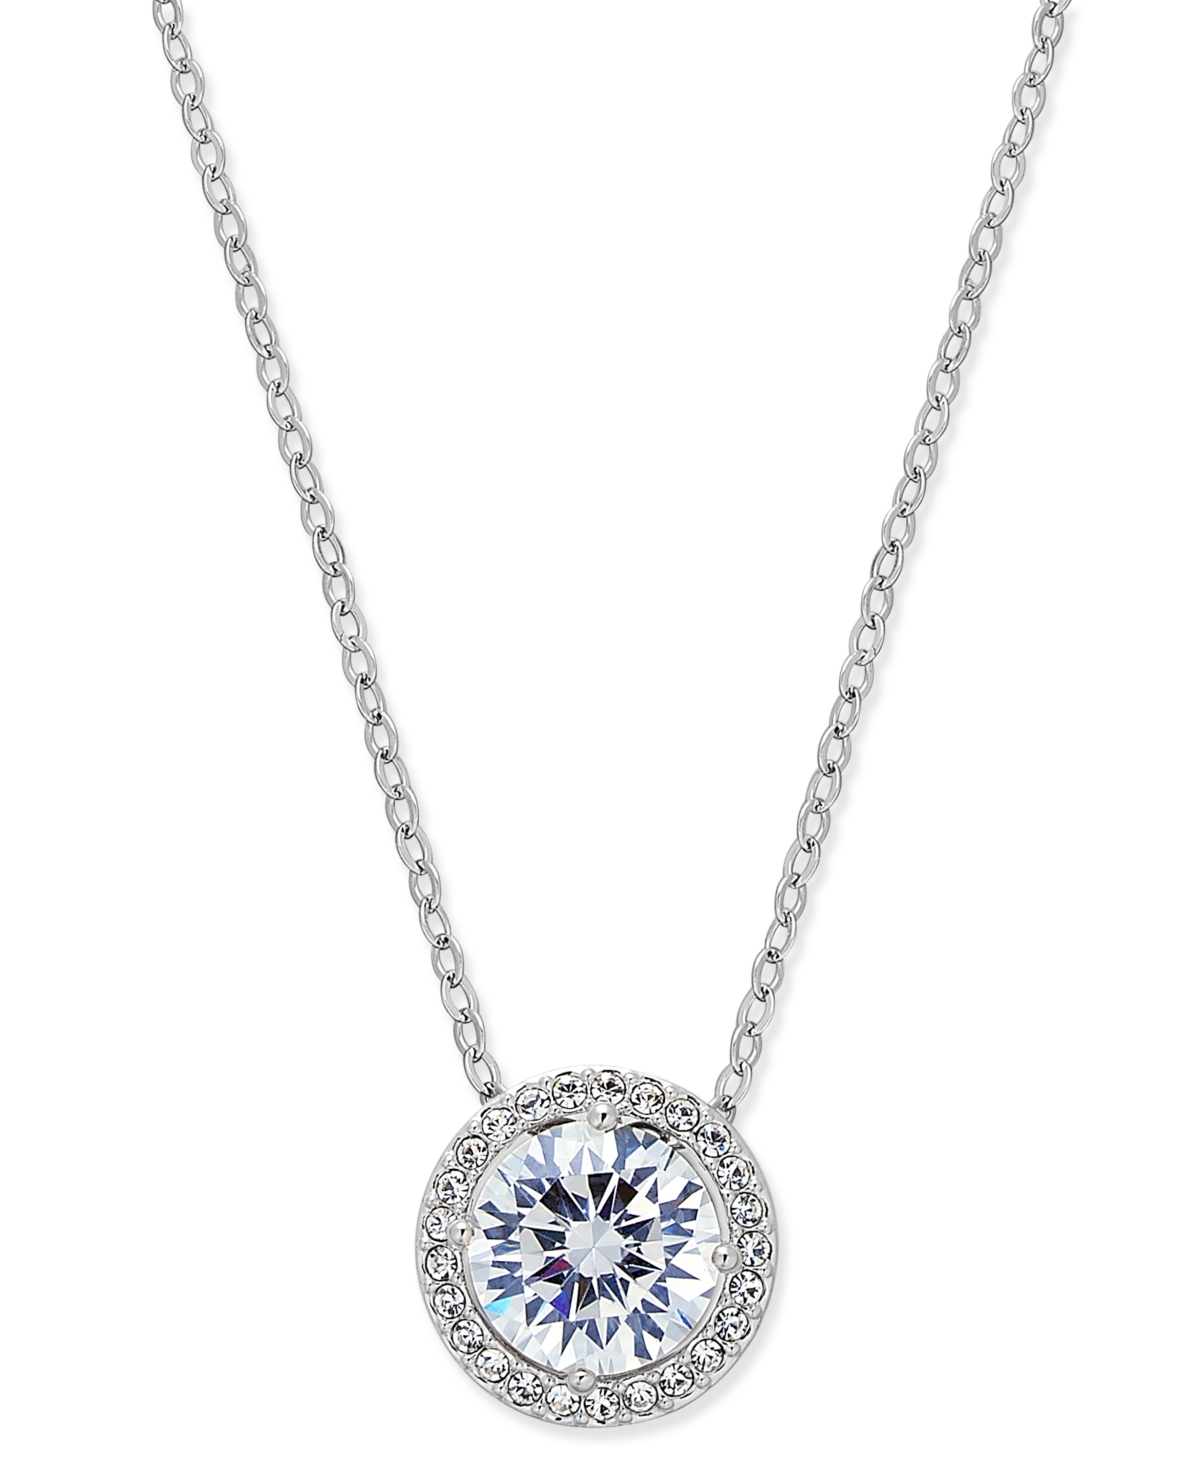 Silver-Tone Crystal Pendant Necklace, Created for Macy's - Silver